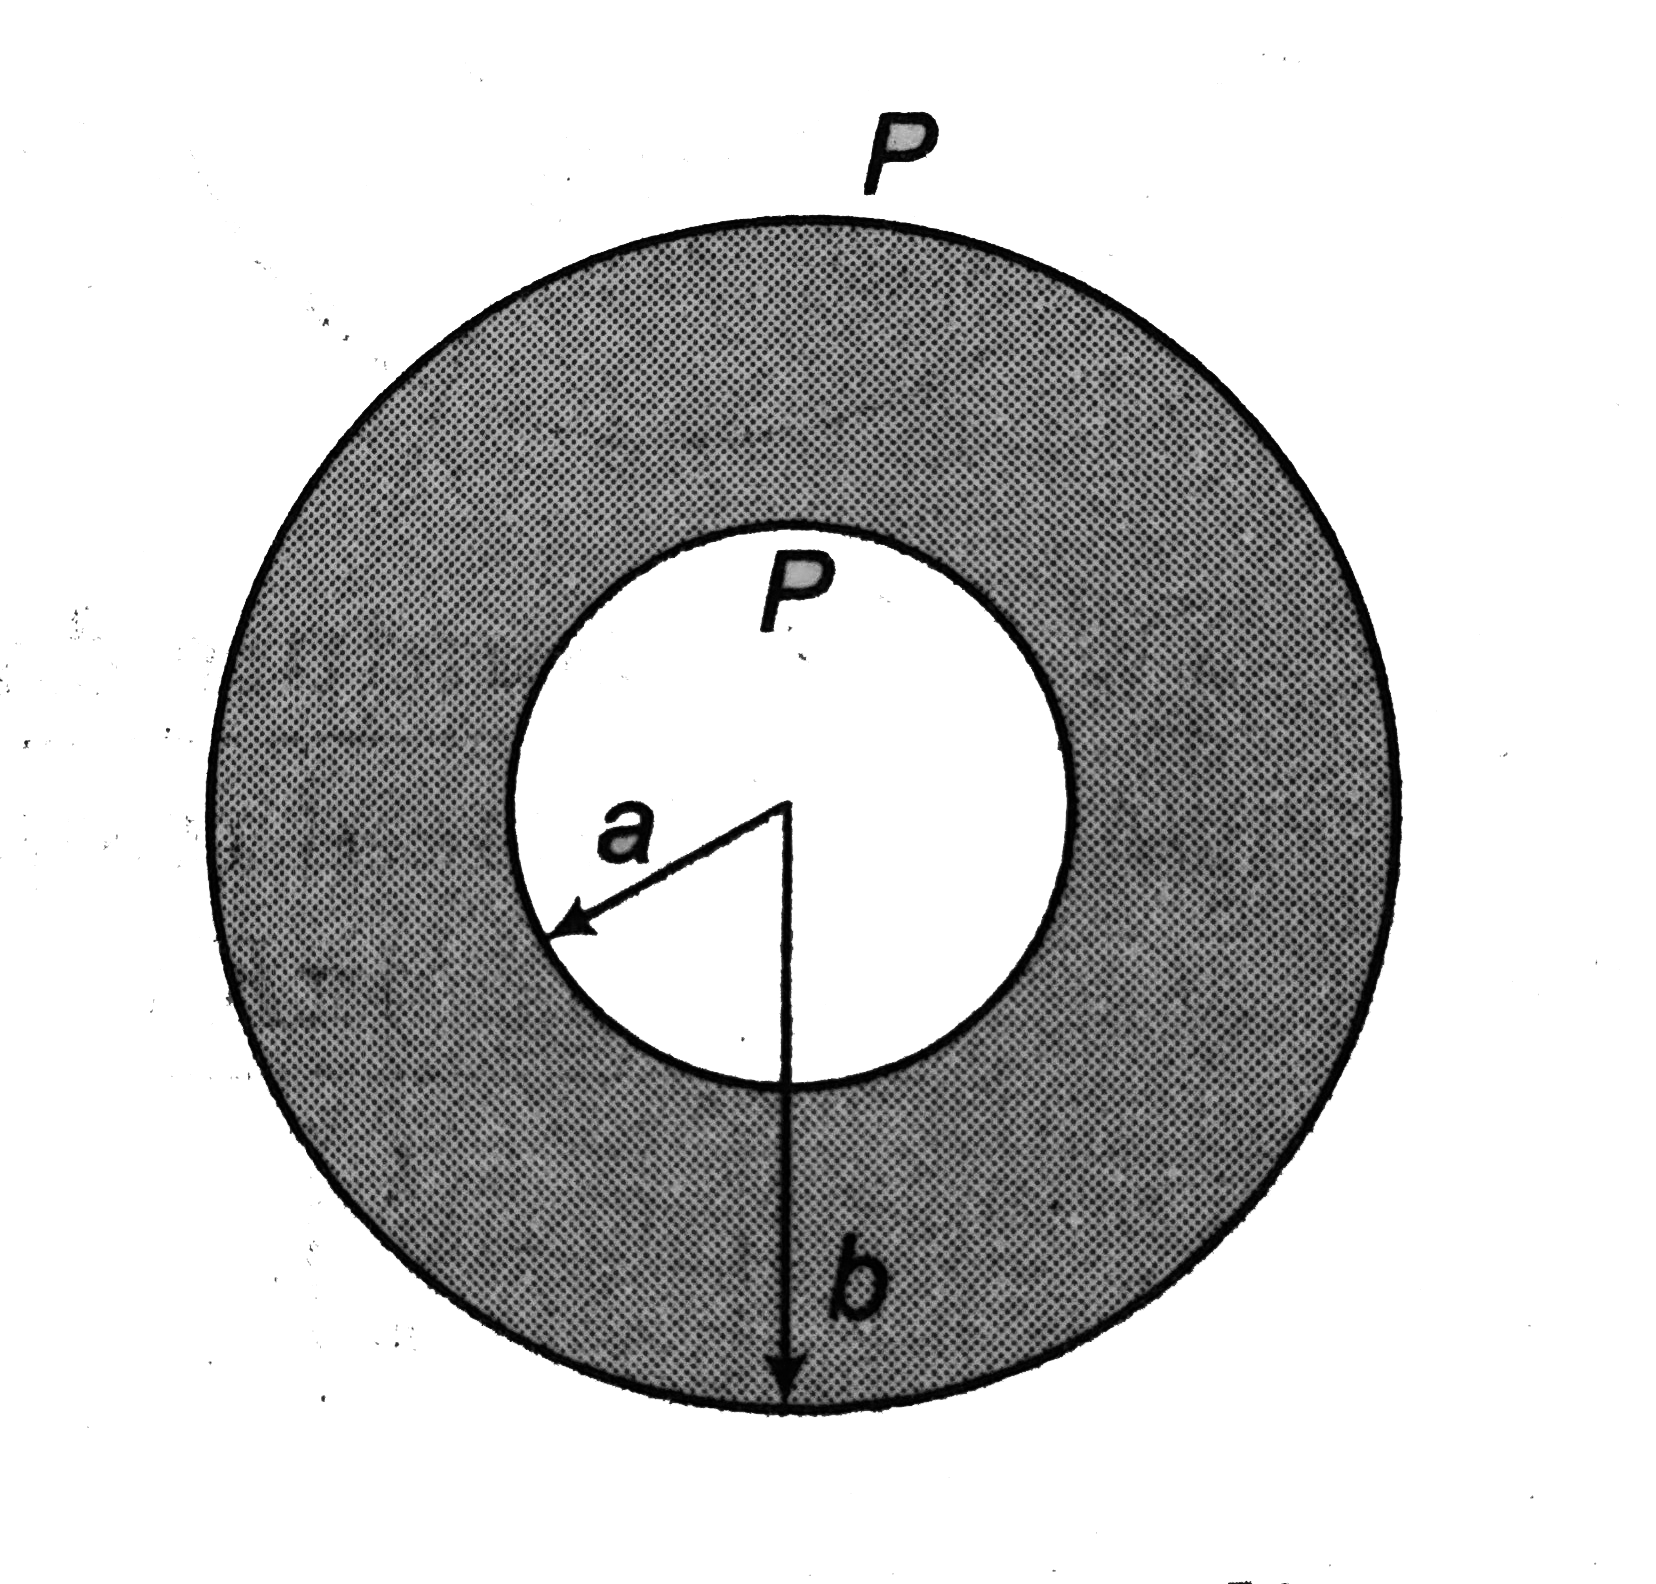 A spherical body of radius 'b' has a concentric cavity of radius 'a' as shown. Thermal conductivity of the material is K. Find thermal resistance between inner surface P and outer surface Q.